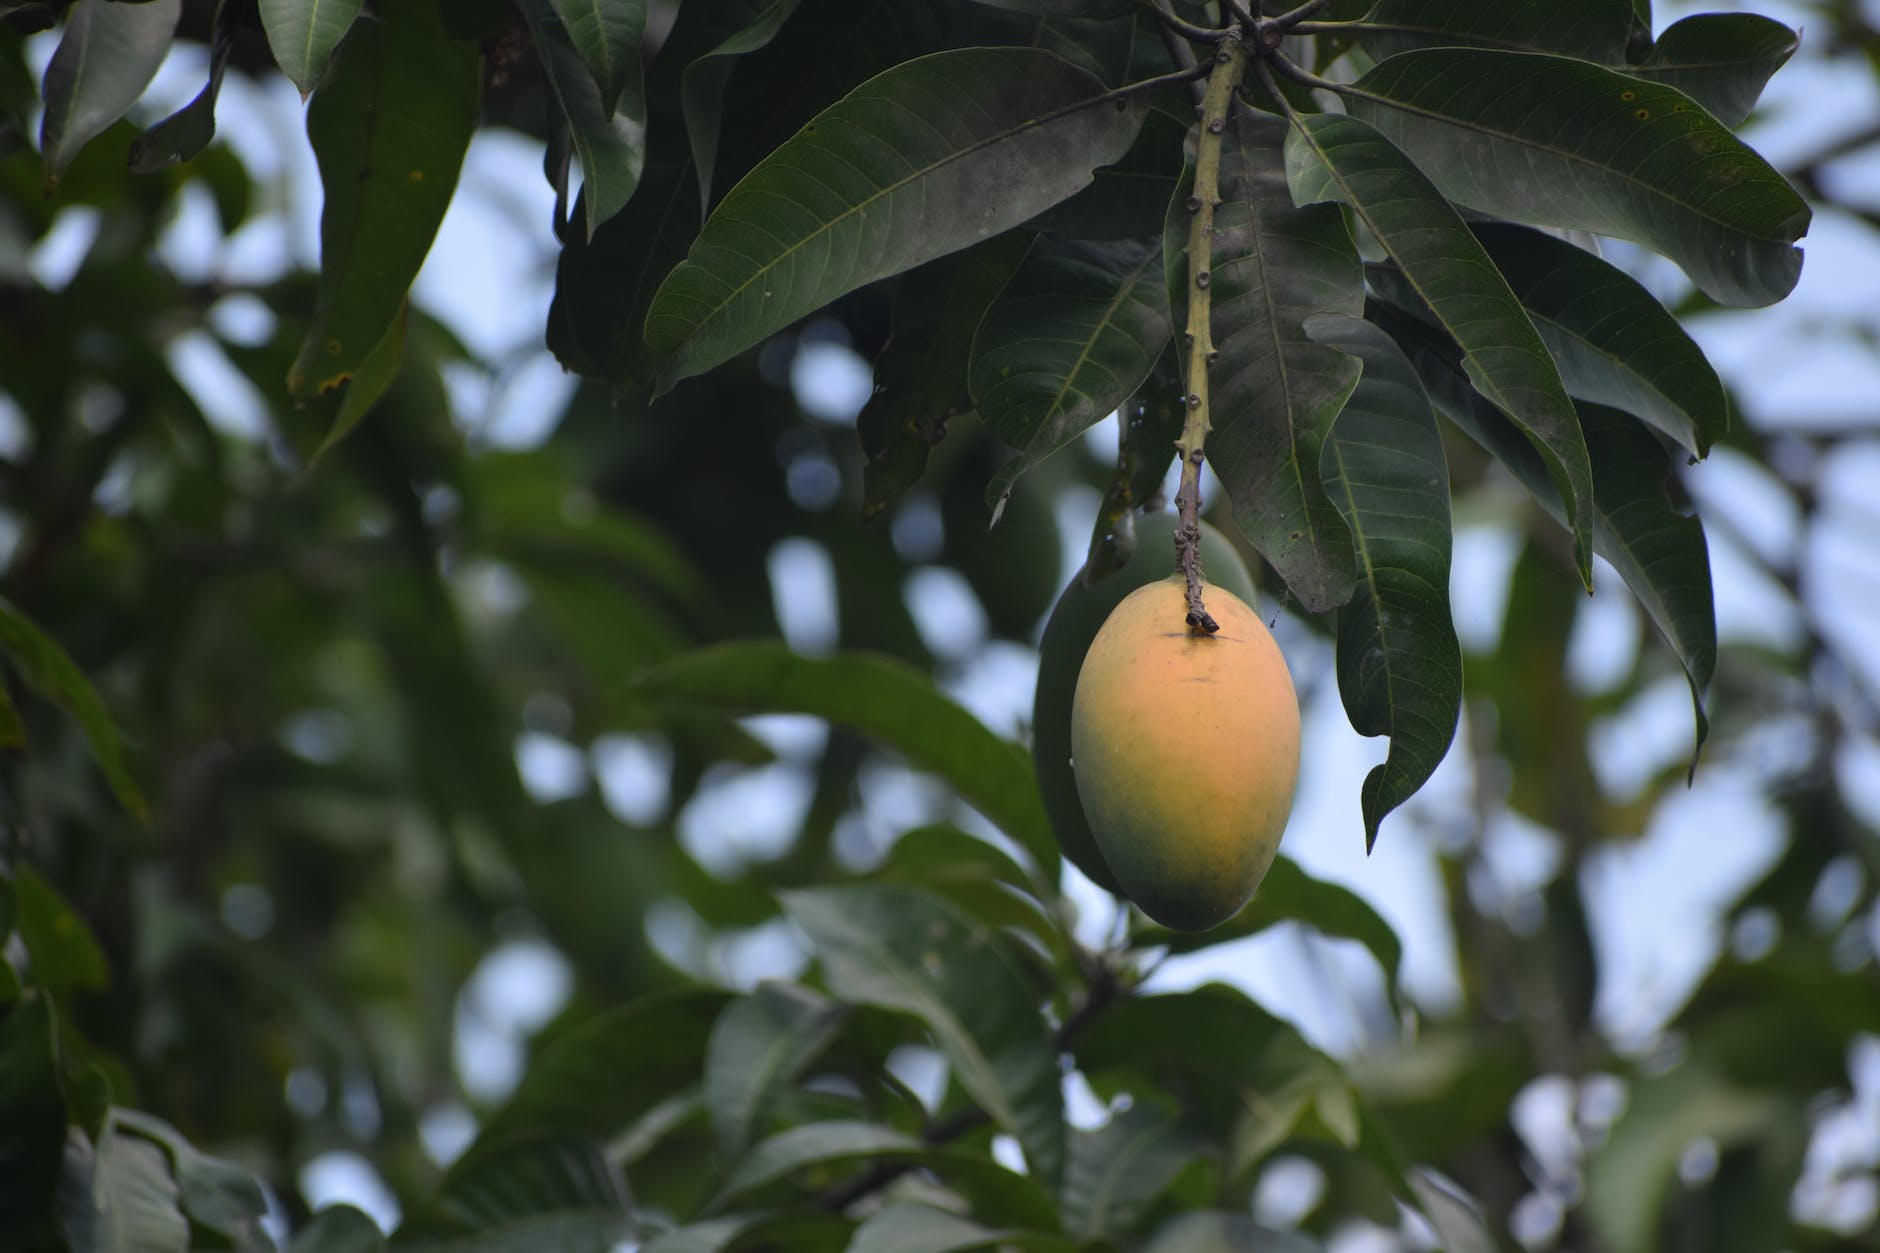 fruits hanging on a tree